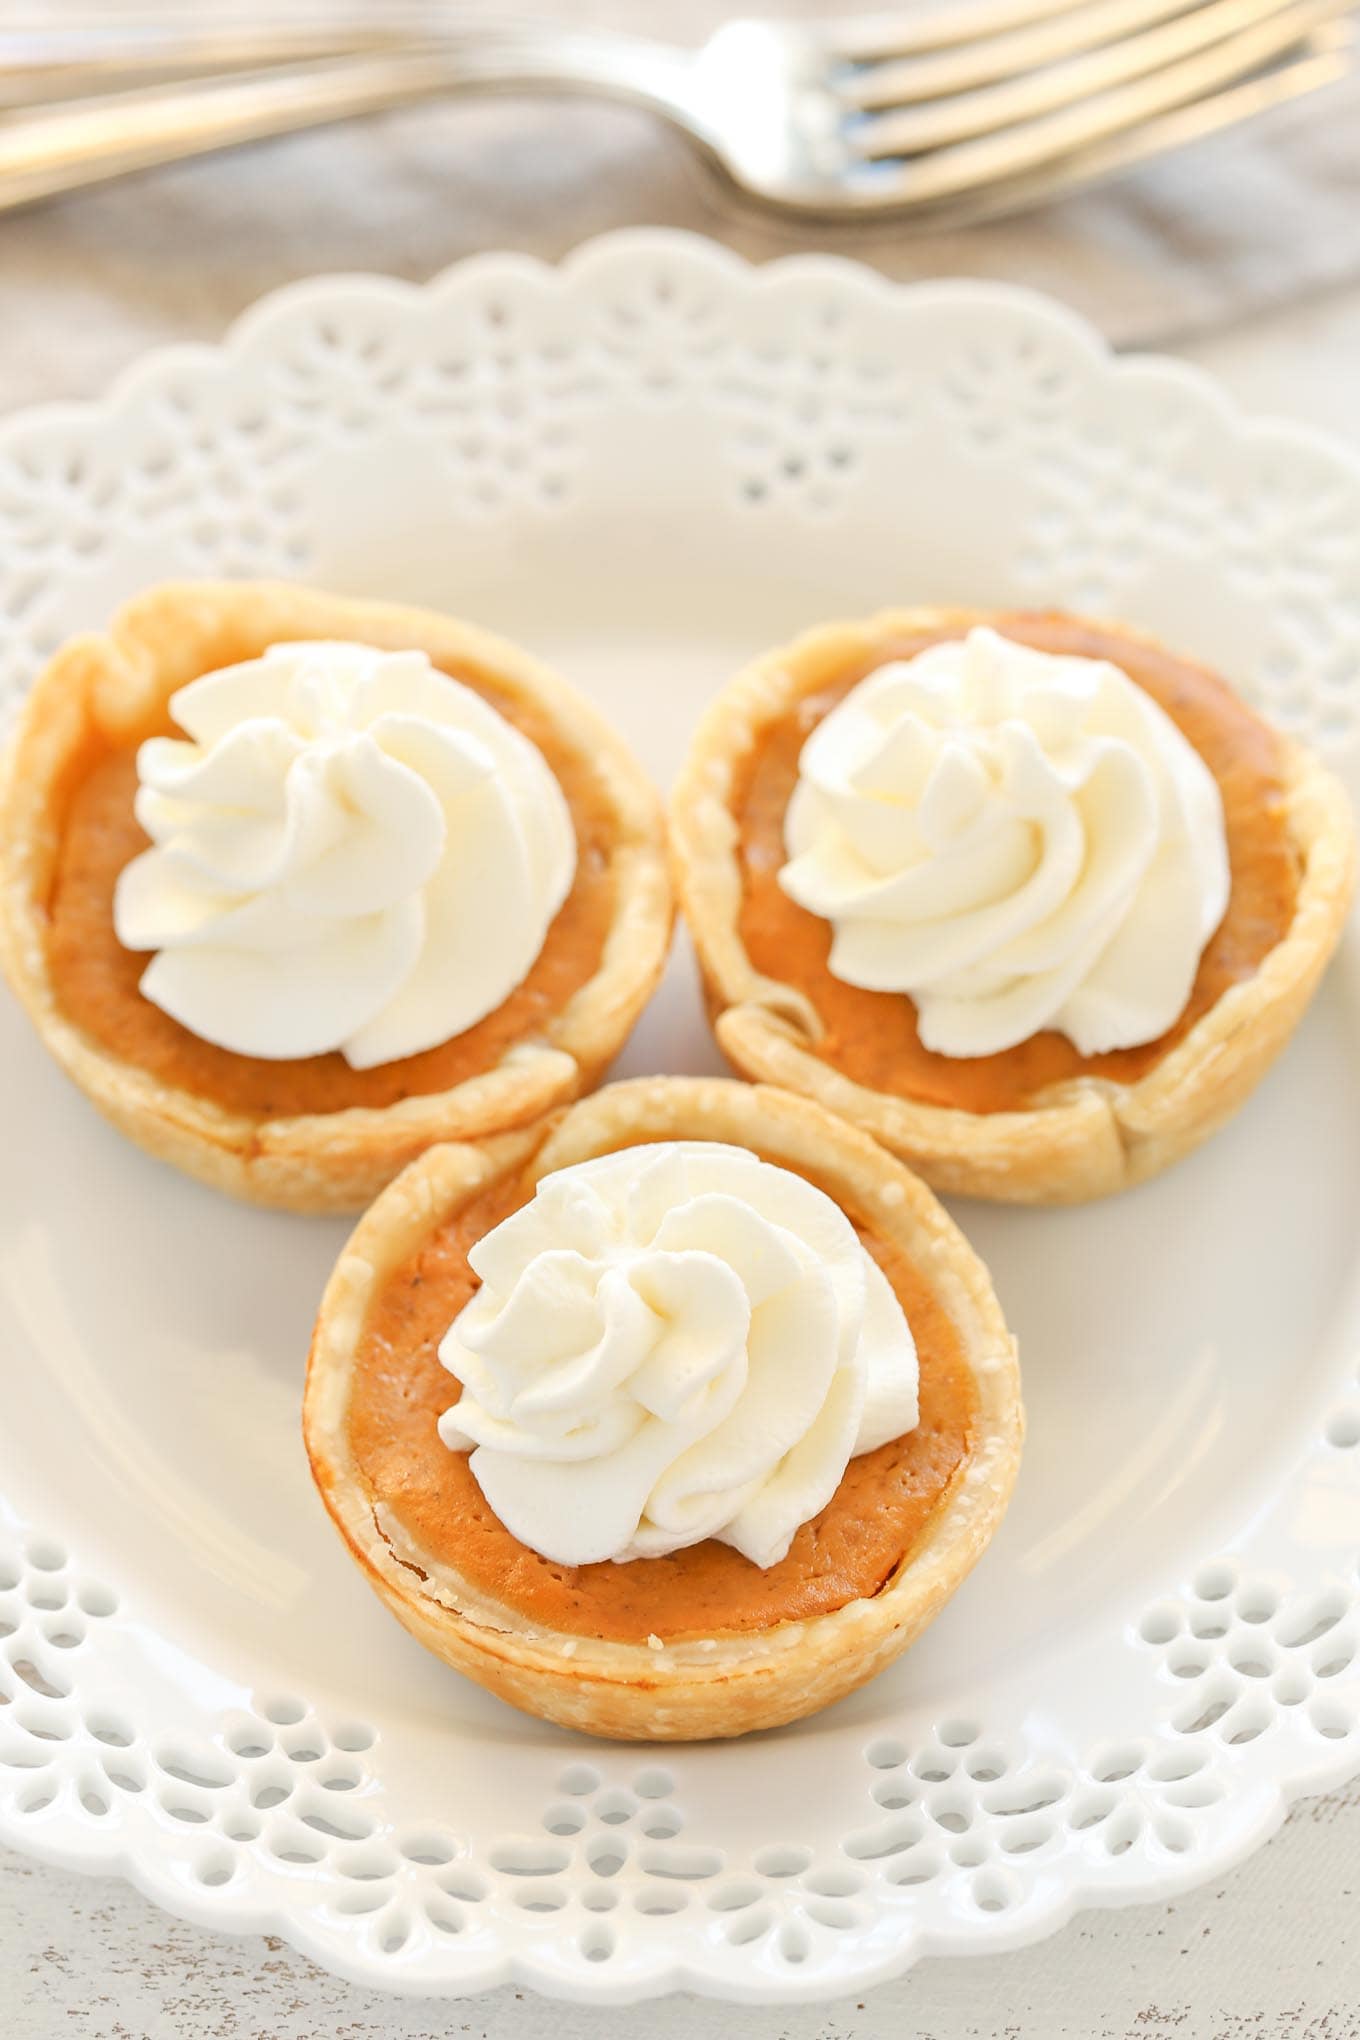 An angled overhead view of three mini pumpkin pies topped with whipped cream on a white plate. Two forks rest in the background.